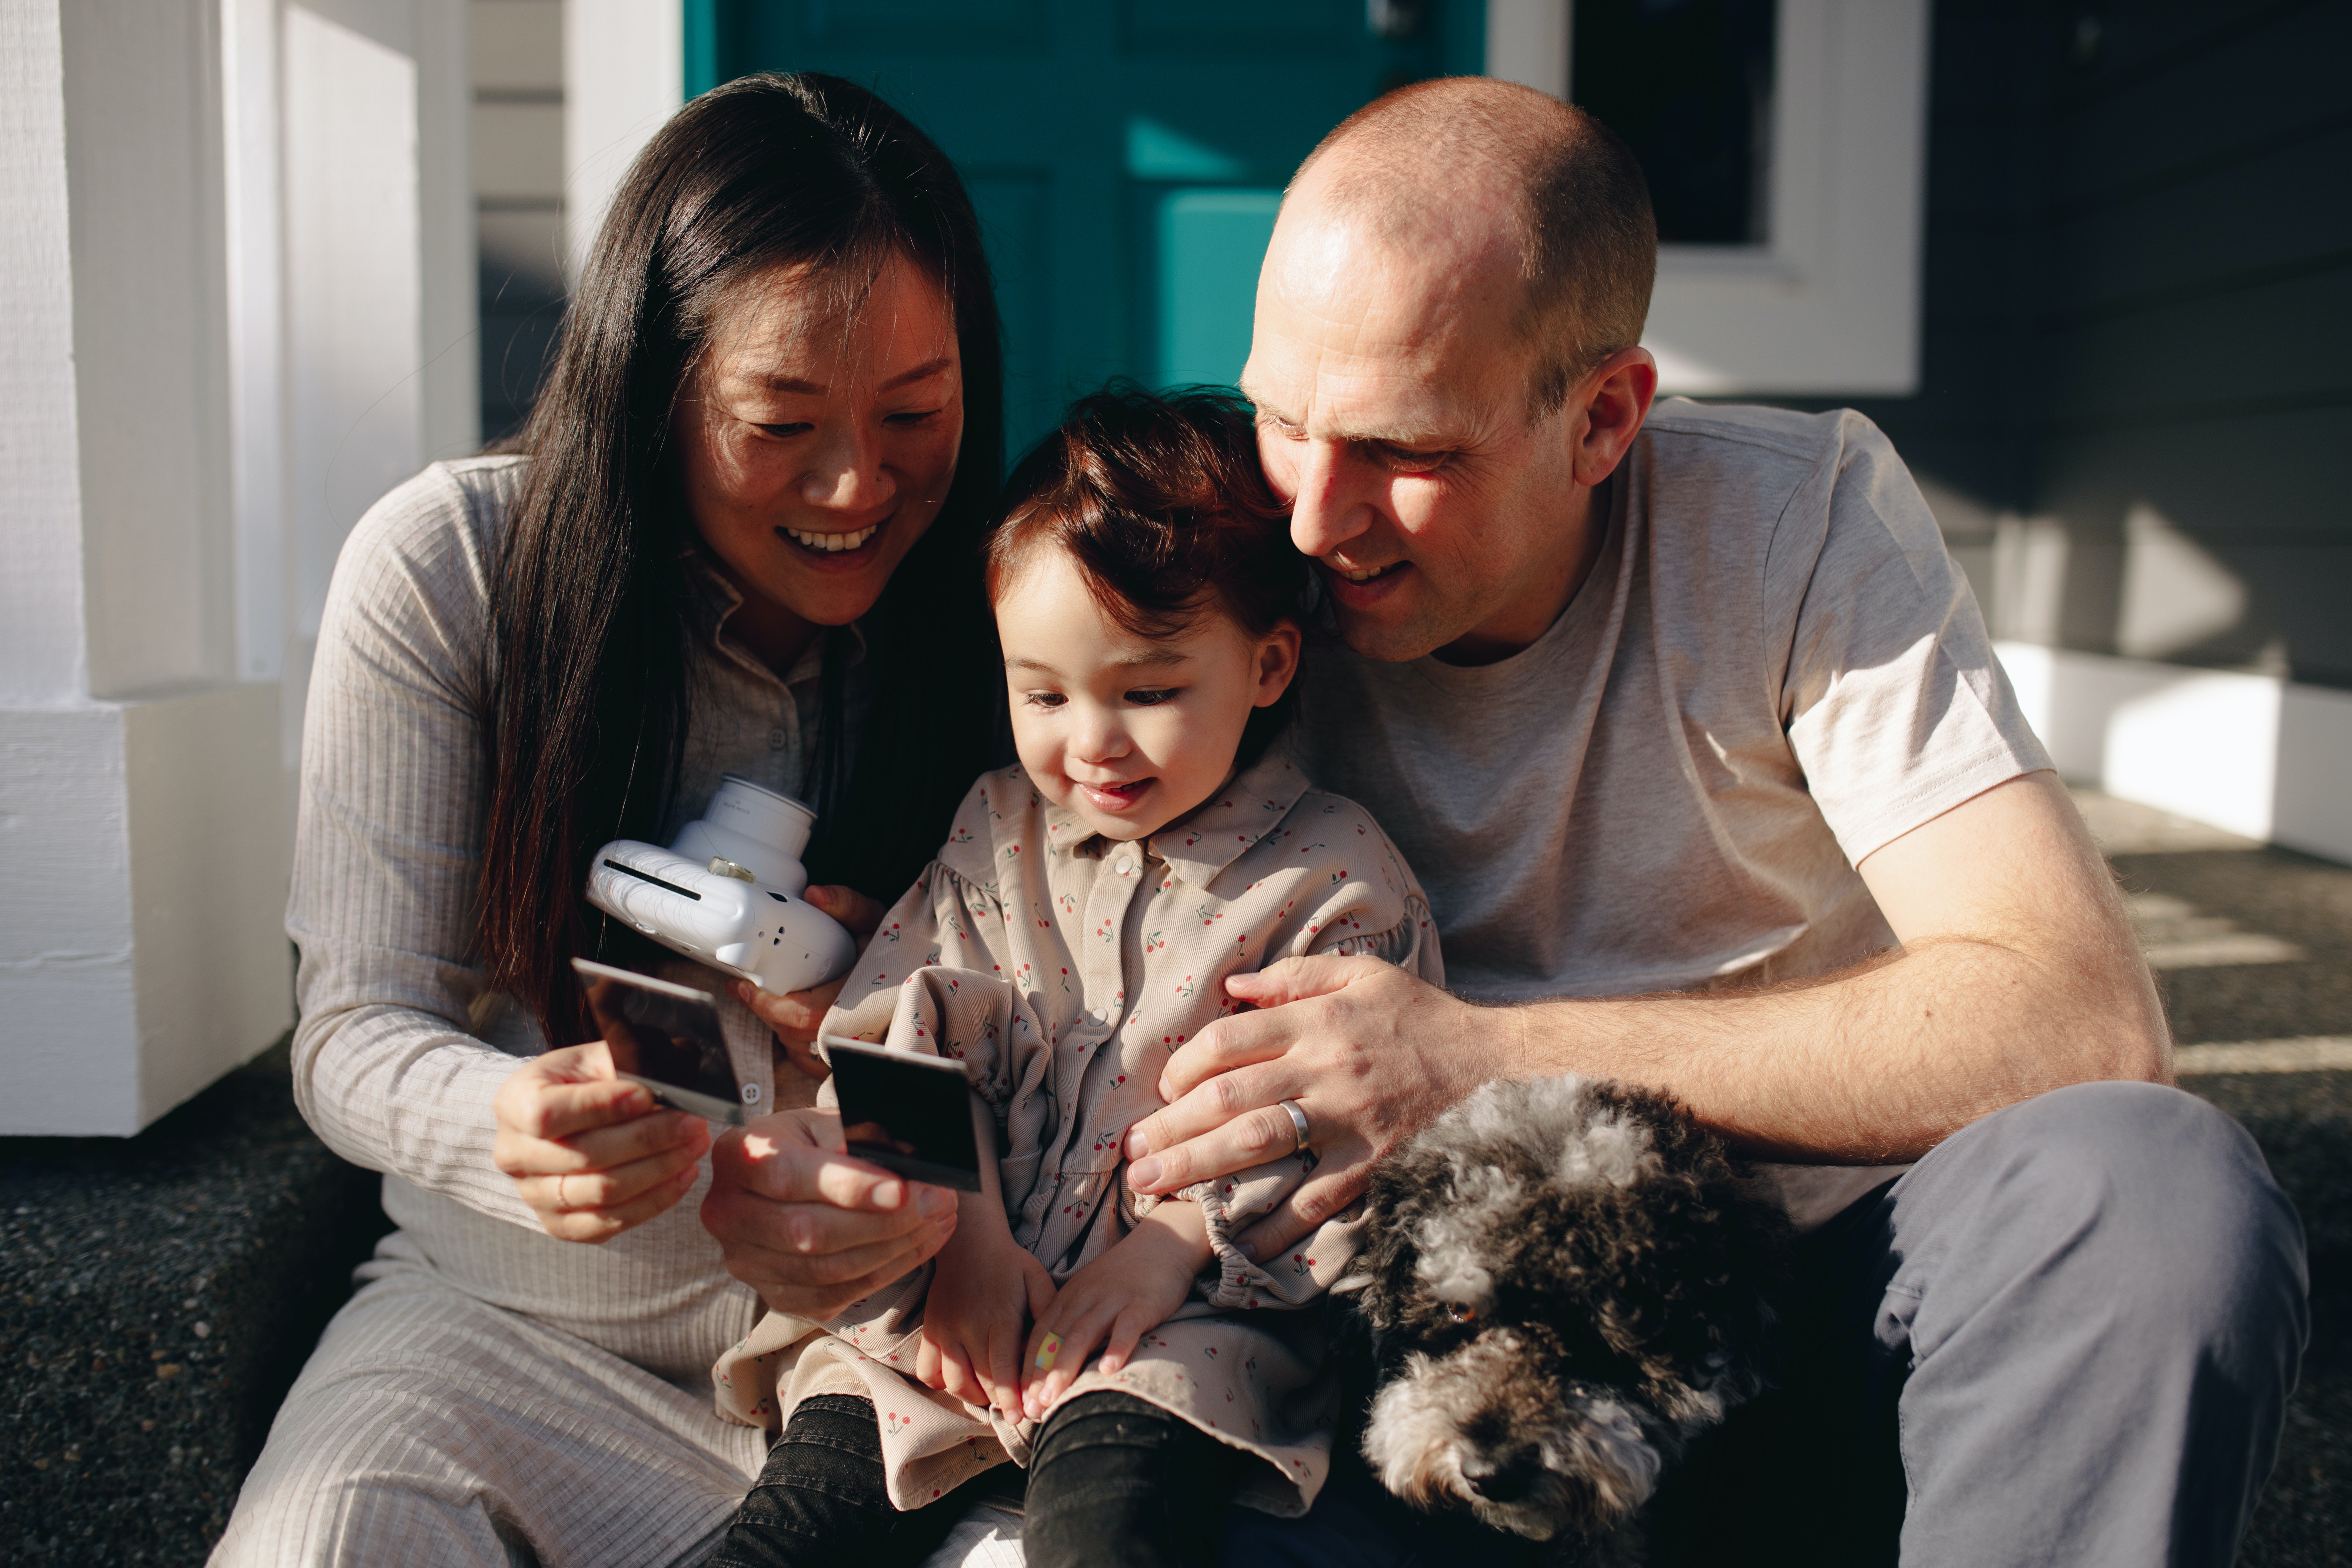 A family looking at photos | Source: Pexels